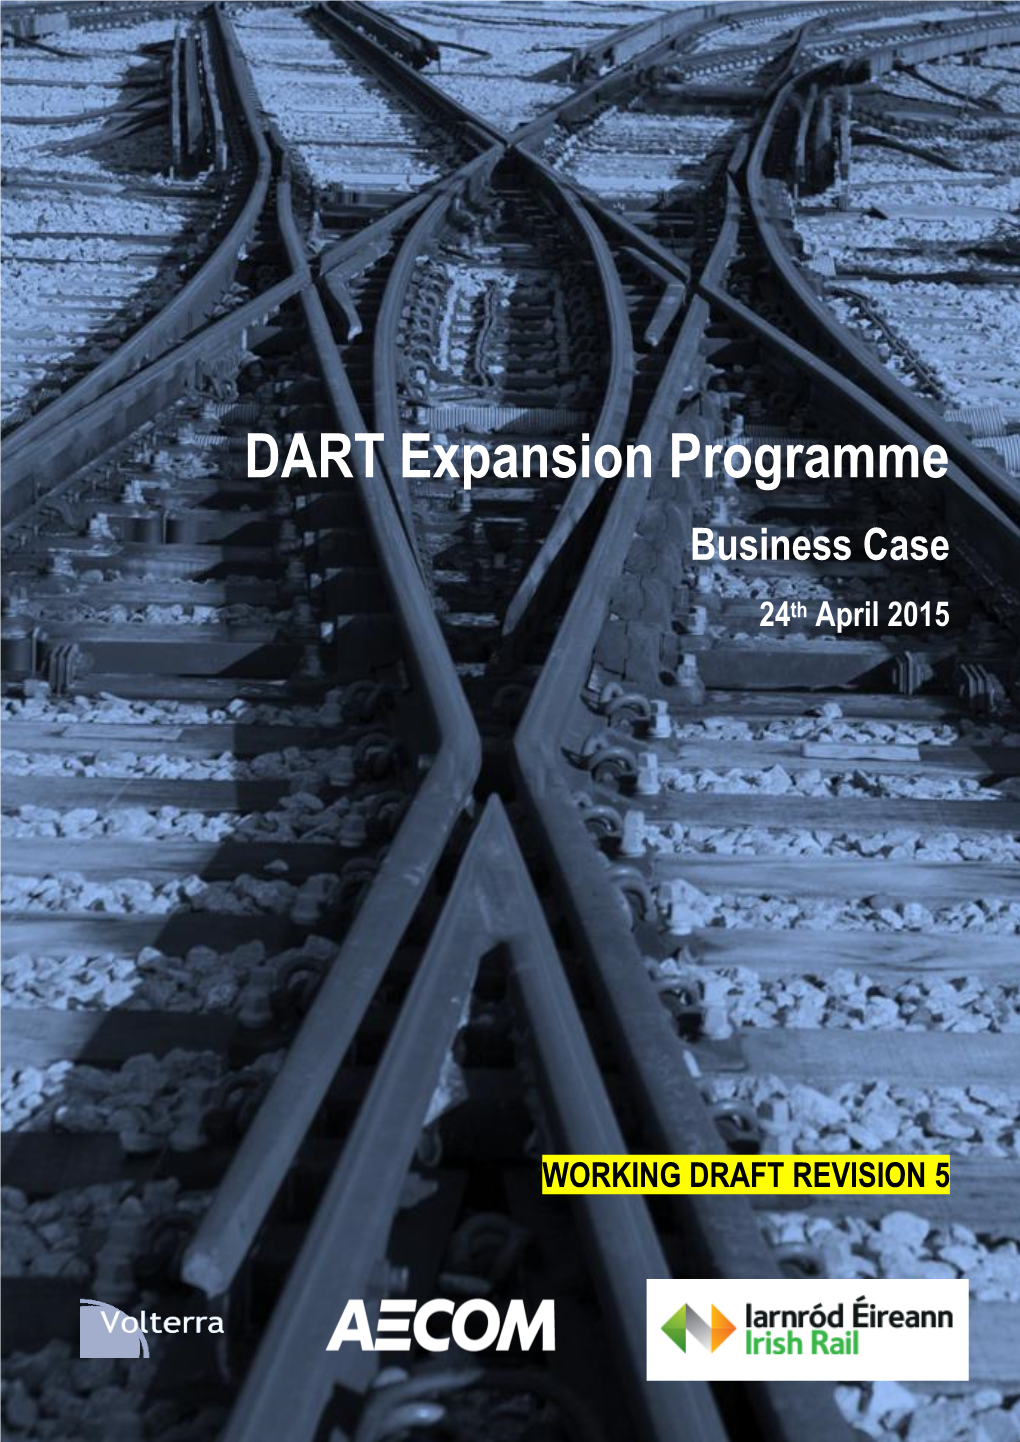 DART Expansion Programme. the Business Case